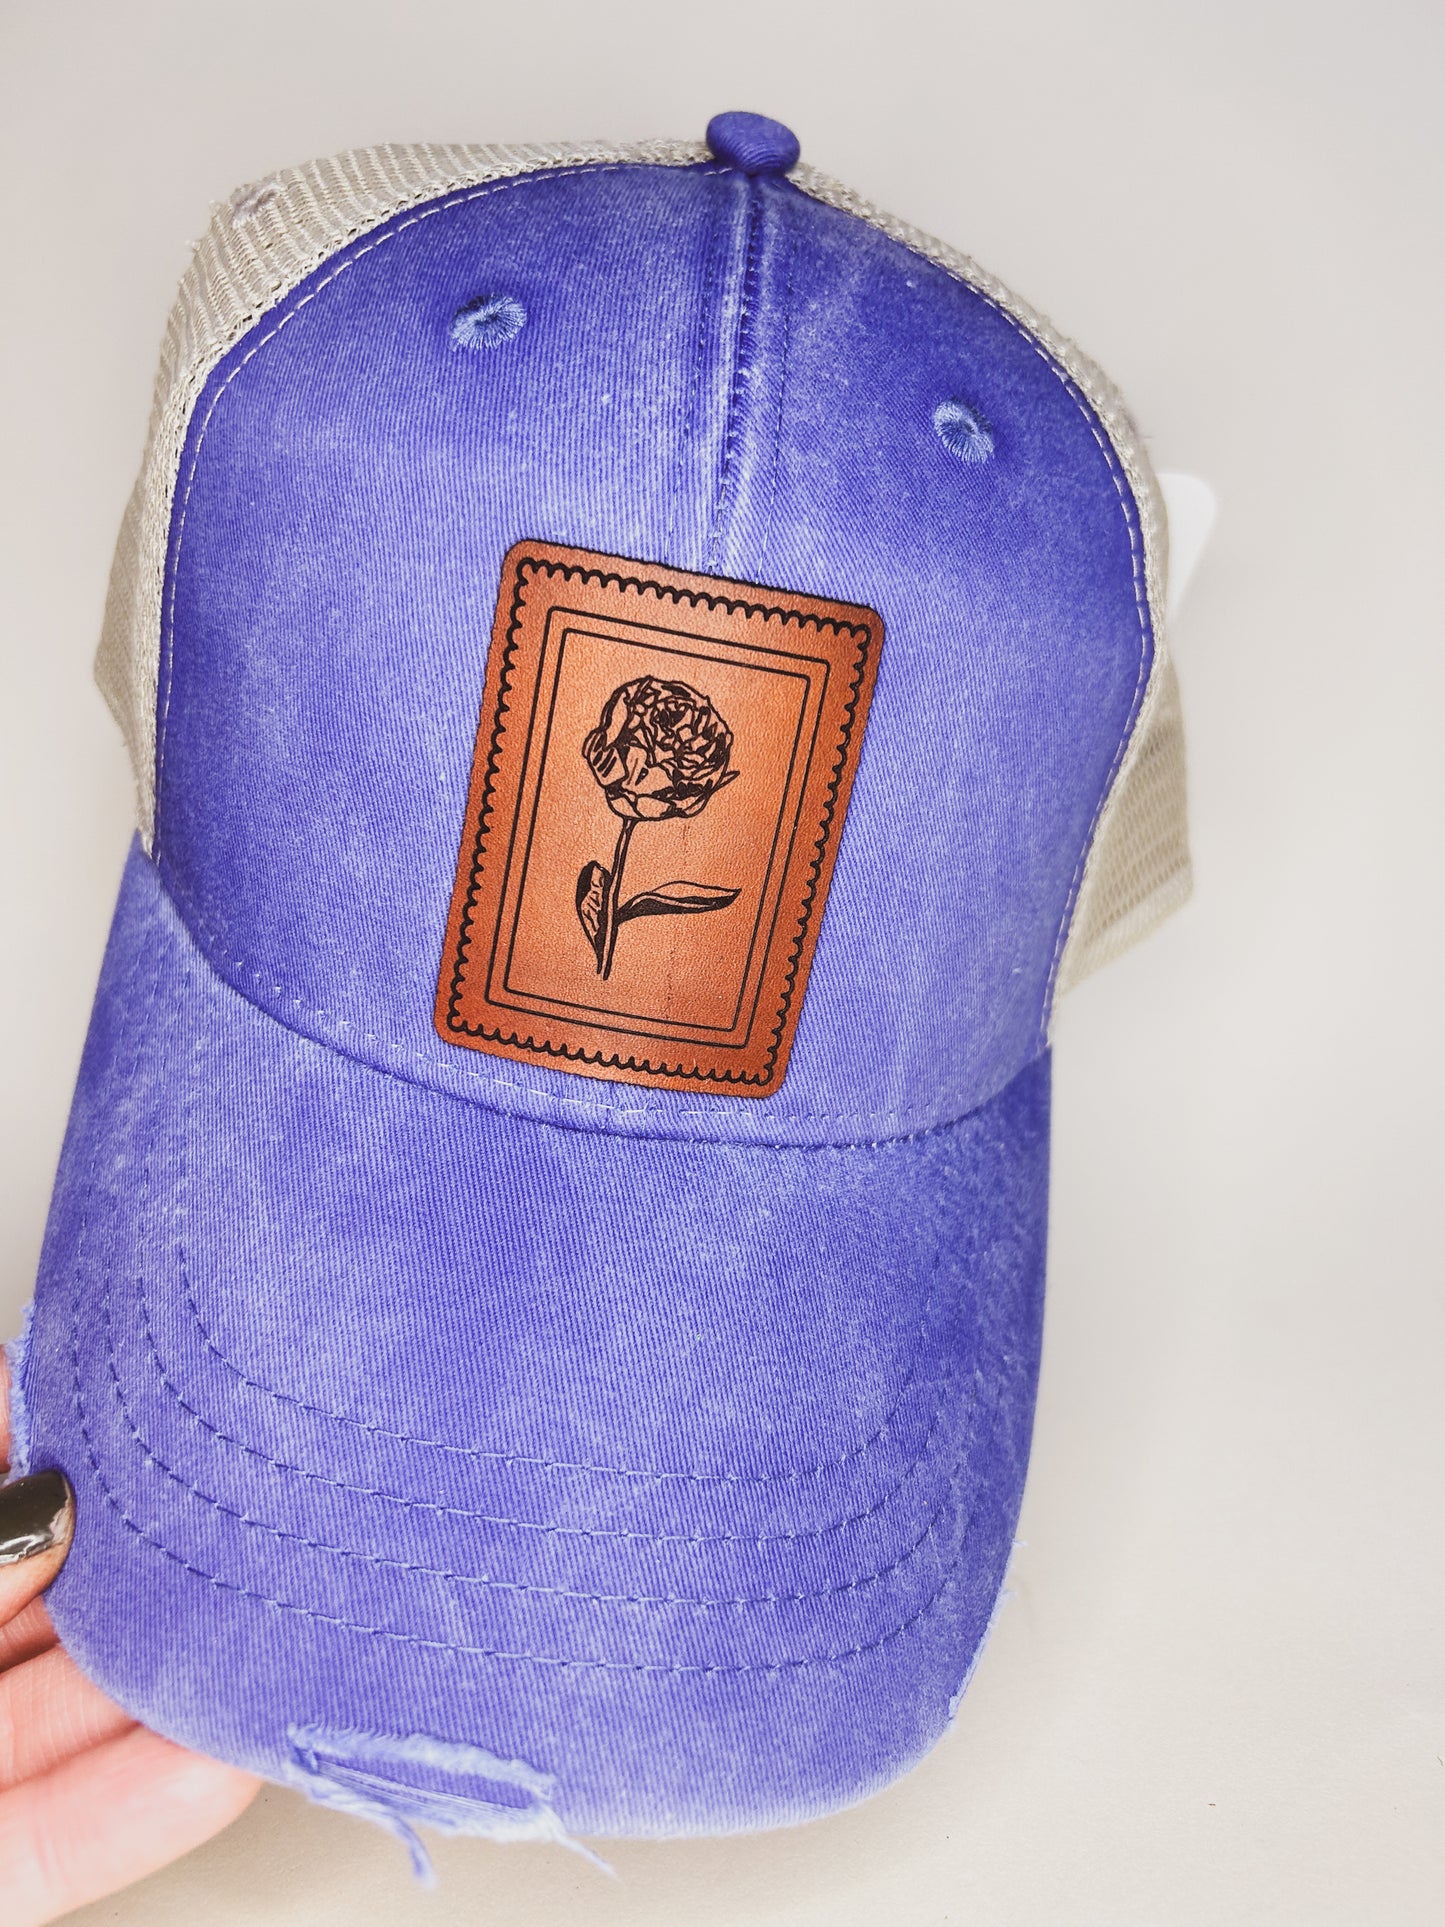 Vintage Peony Stamp Leather Patch Hat - Blue Hat